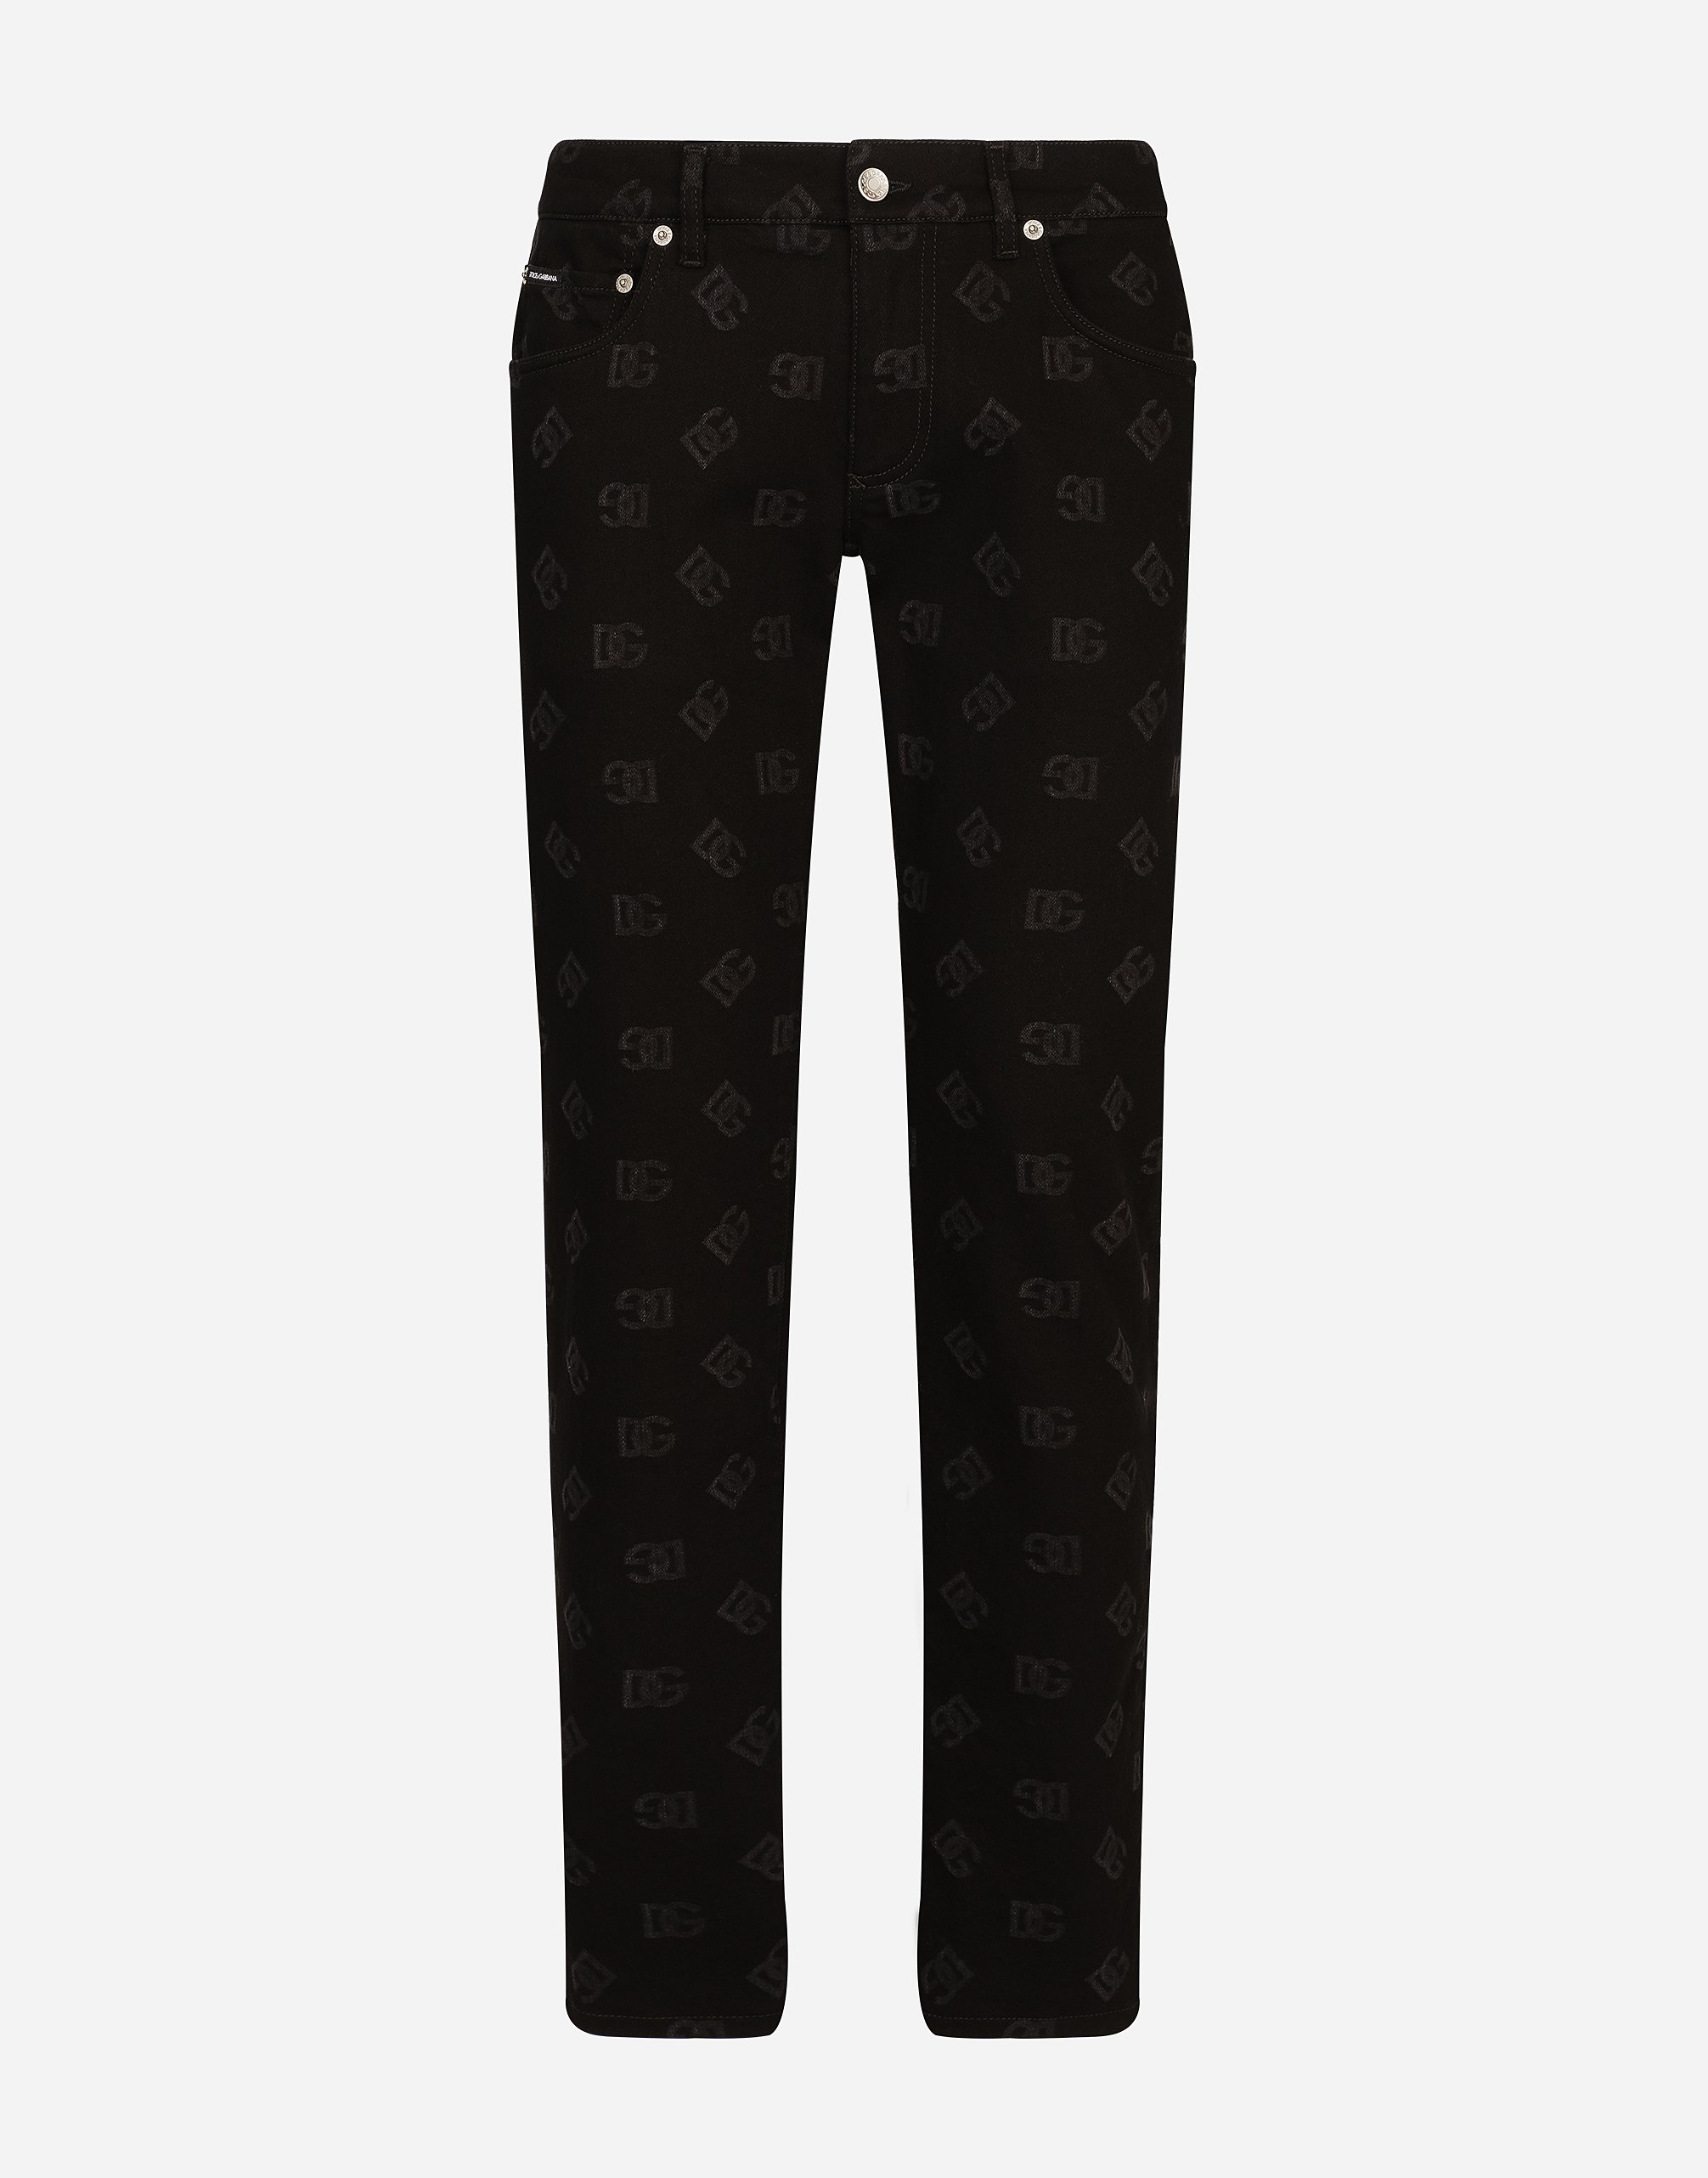 Black skinny jeans with all-over DG logo print in Multicolor